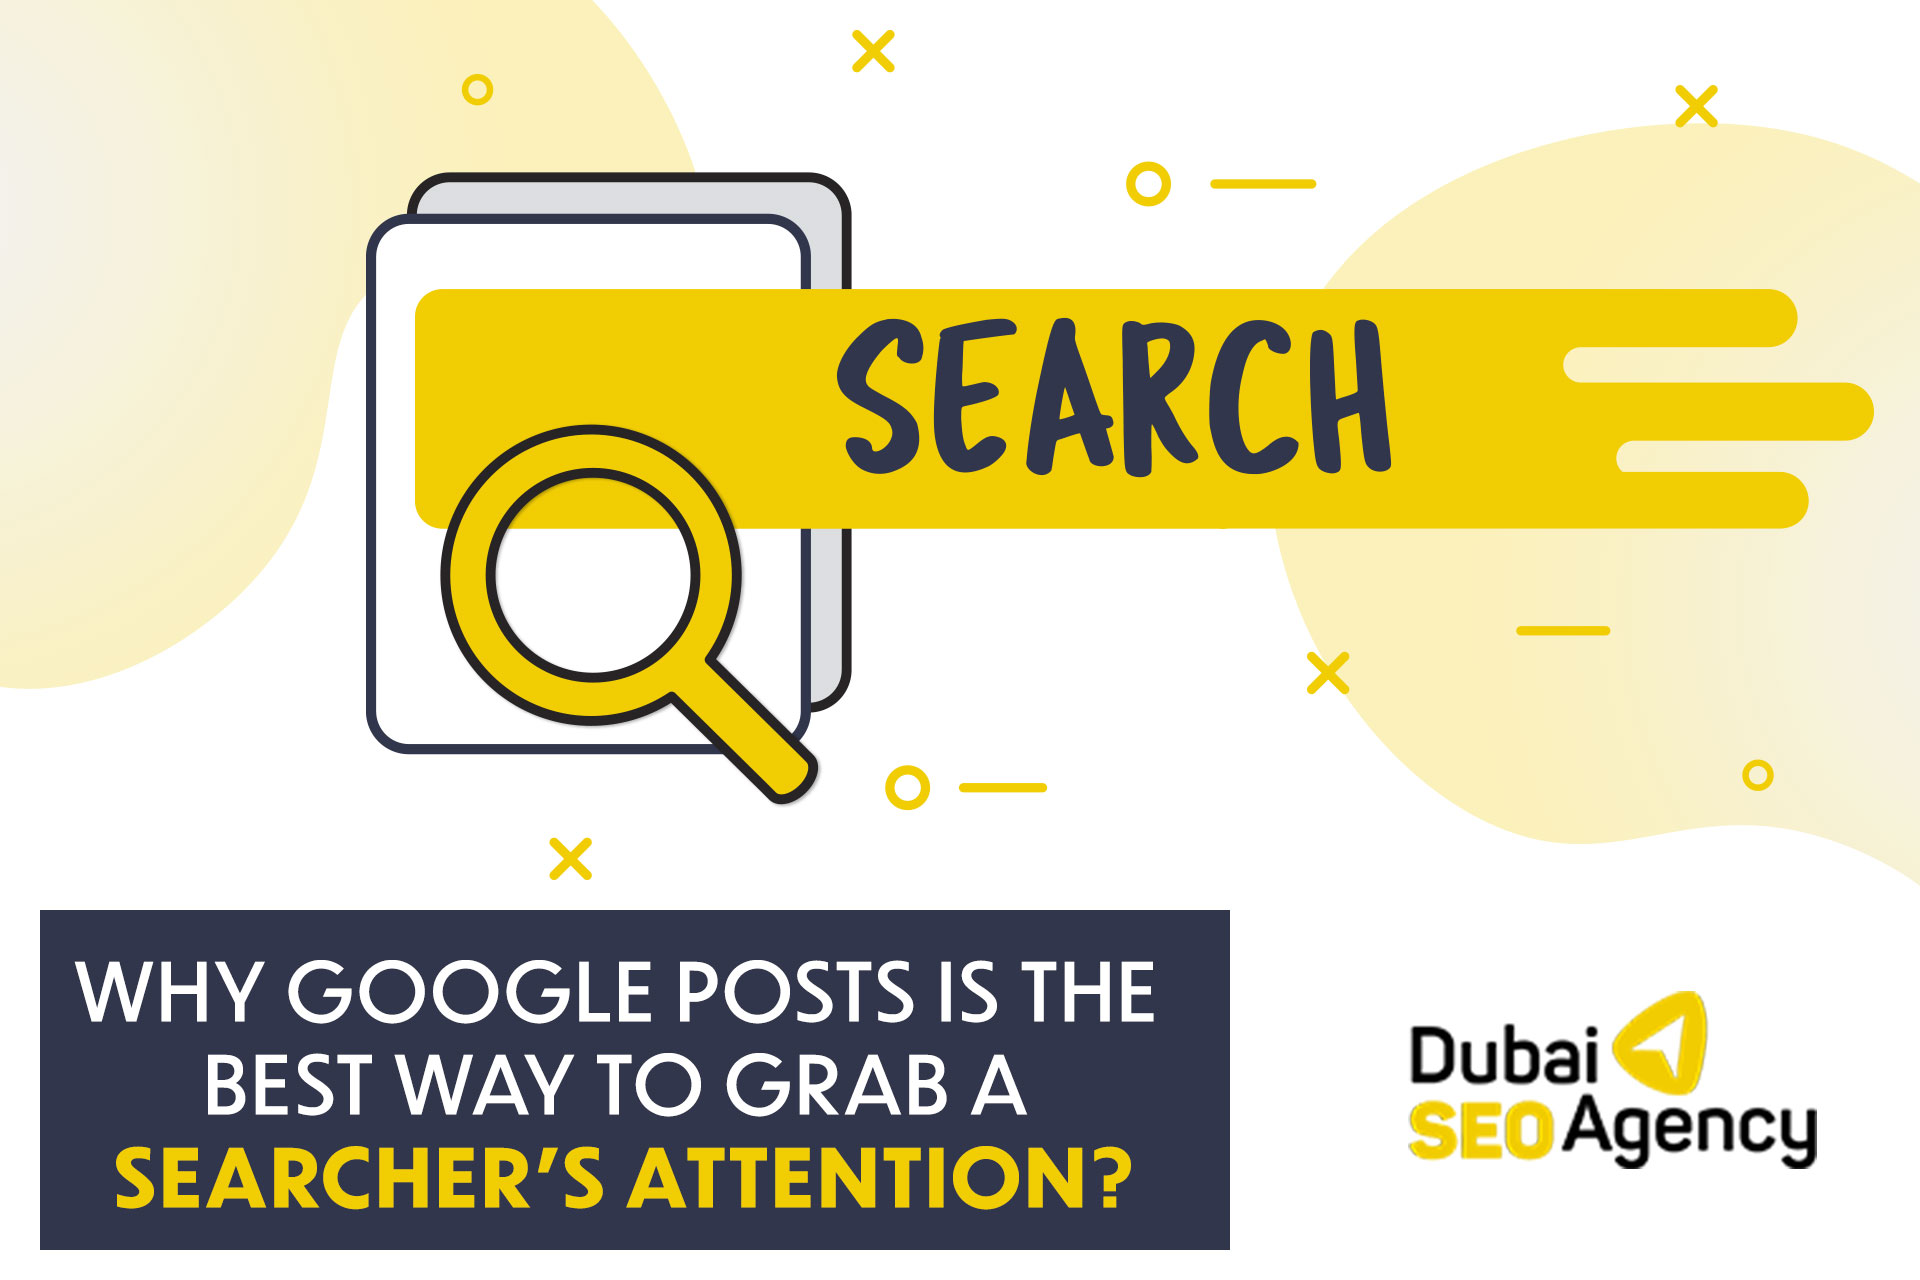 Why Google Posts is the Best Way to Grab a Searcher’s Attention?